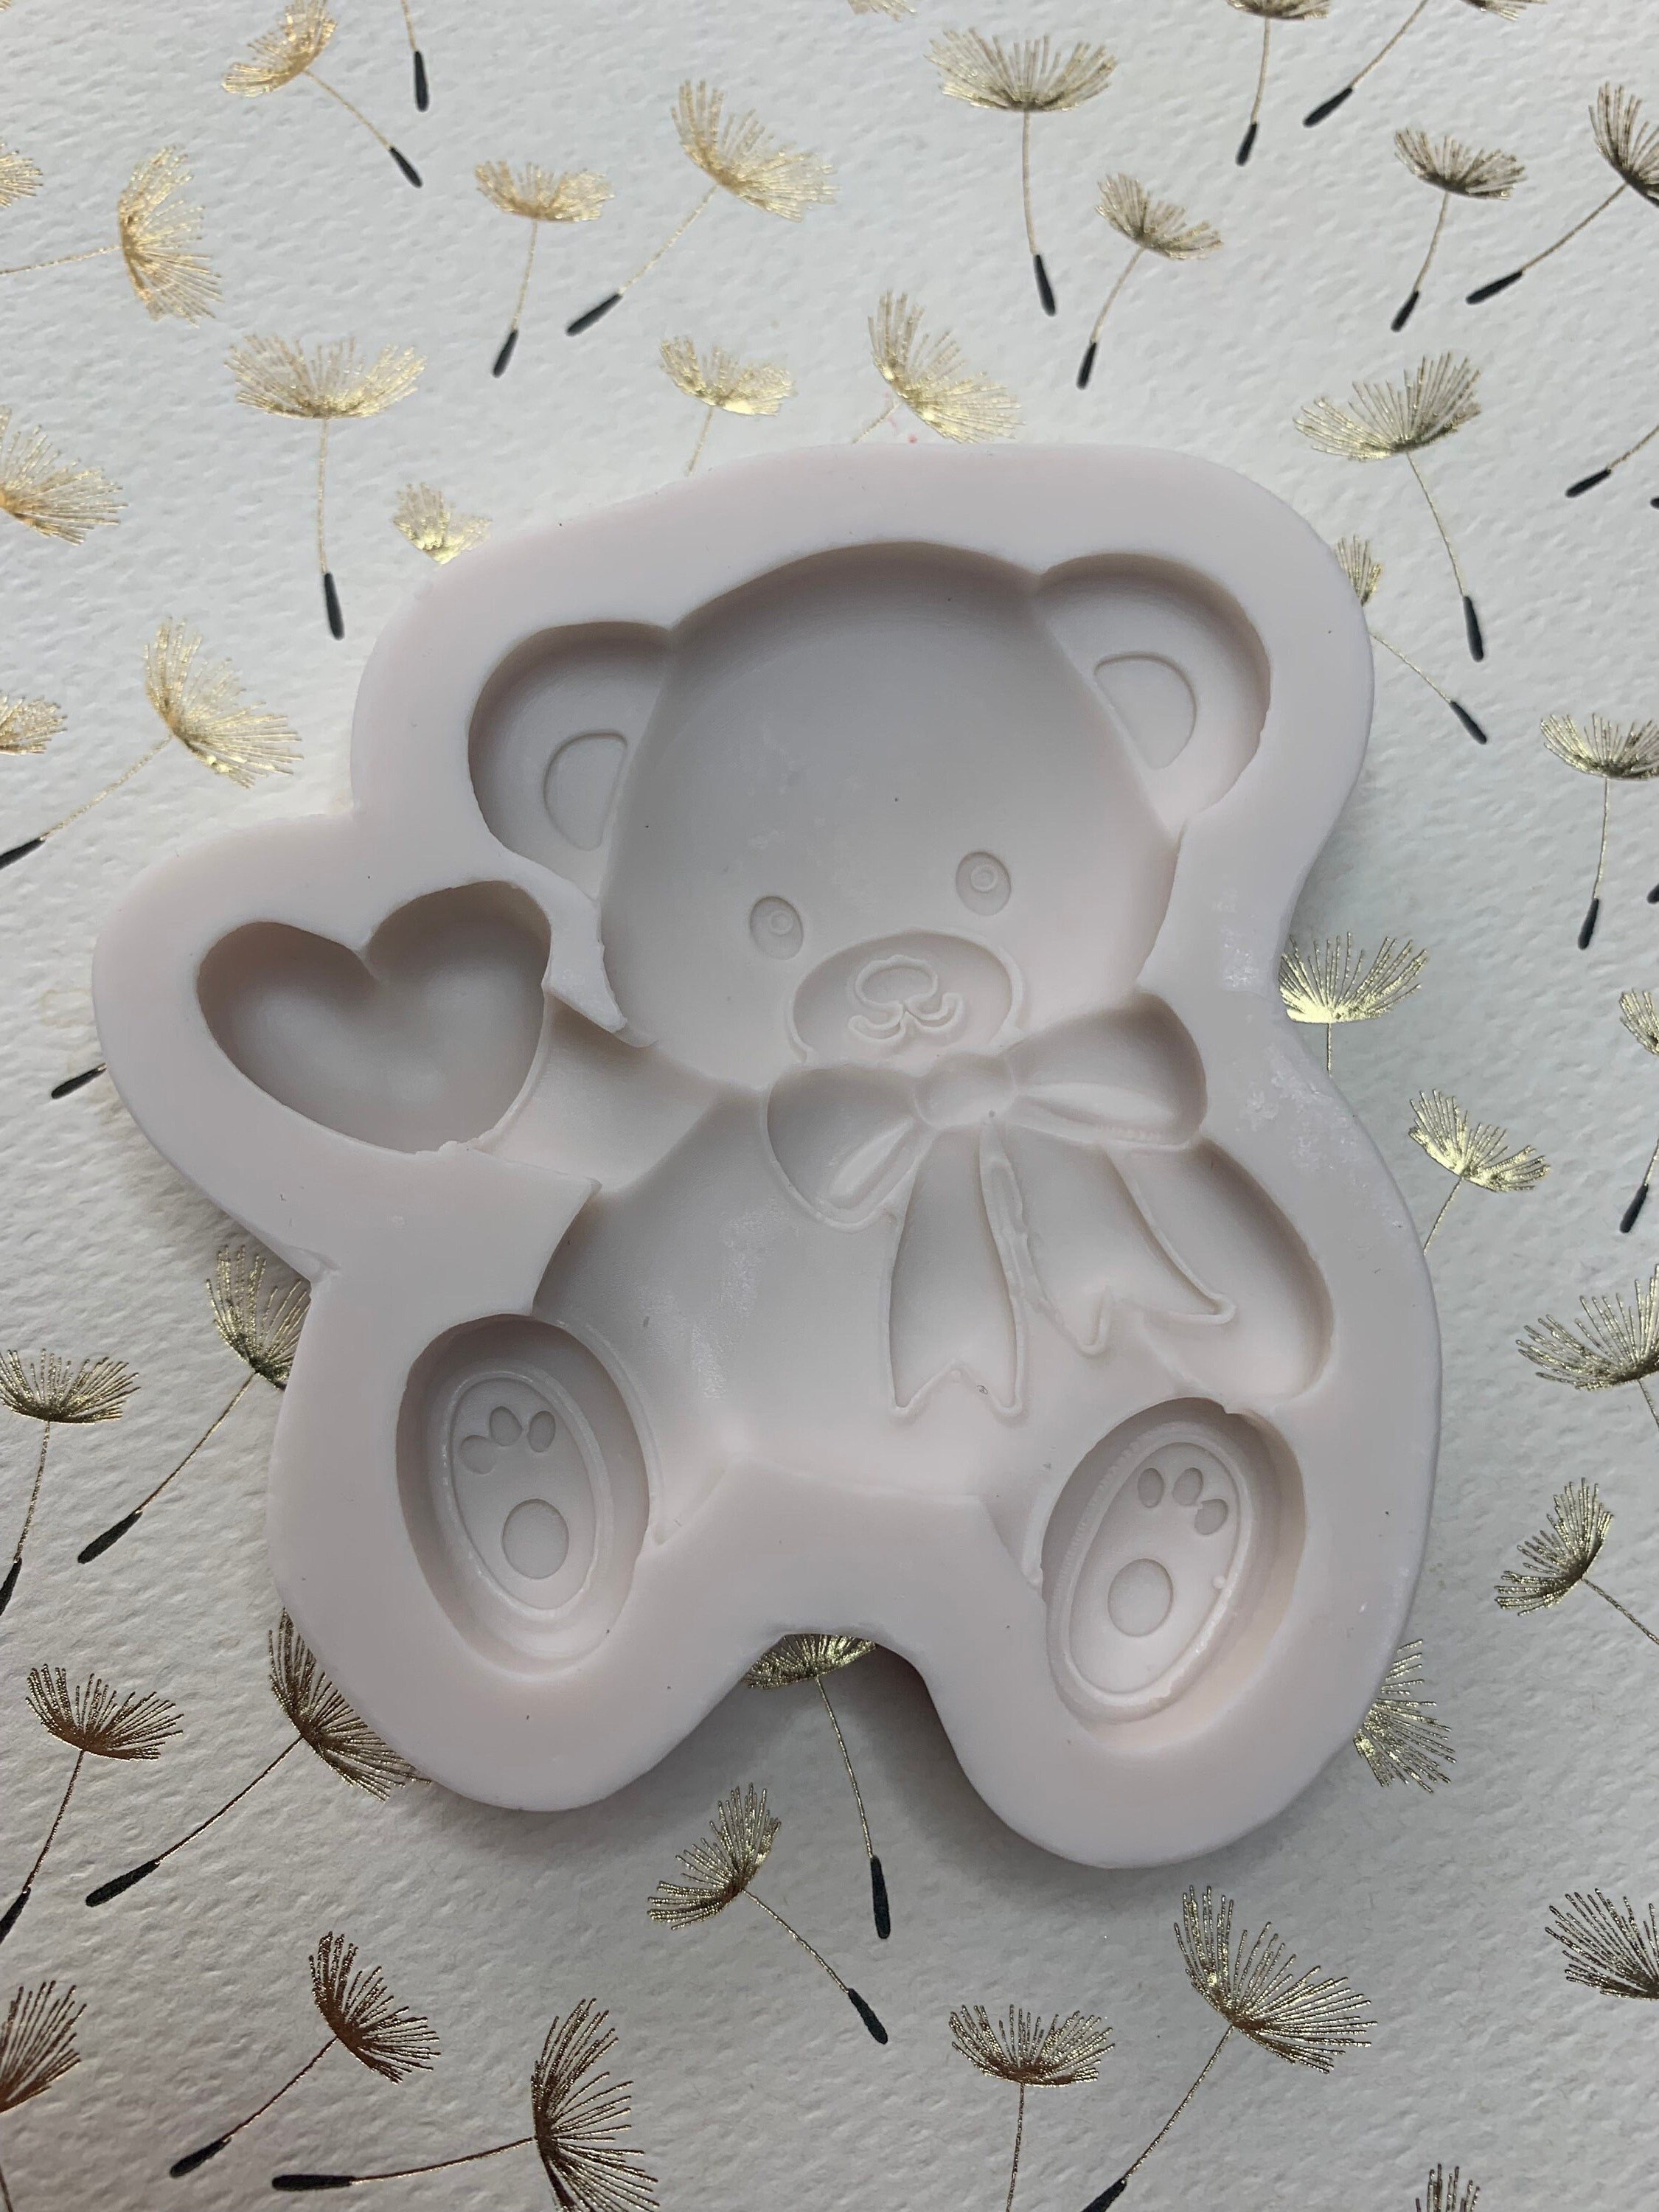 Bear Silicone Cookie Mold – Artesão Cookie Molds